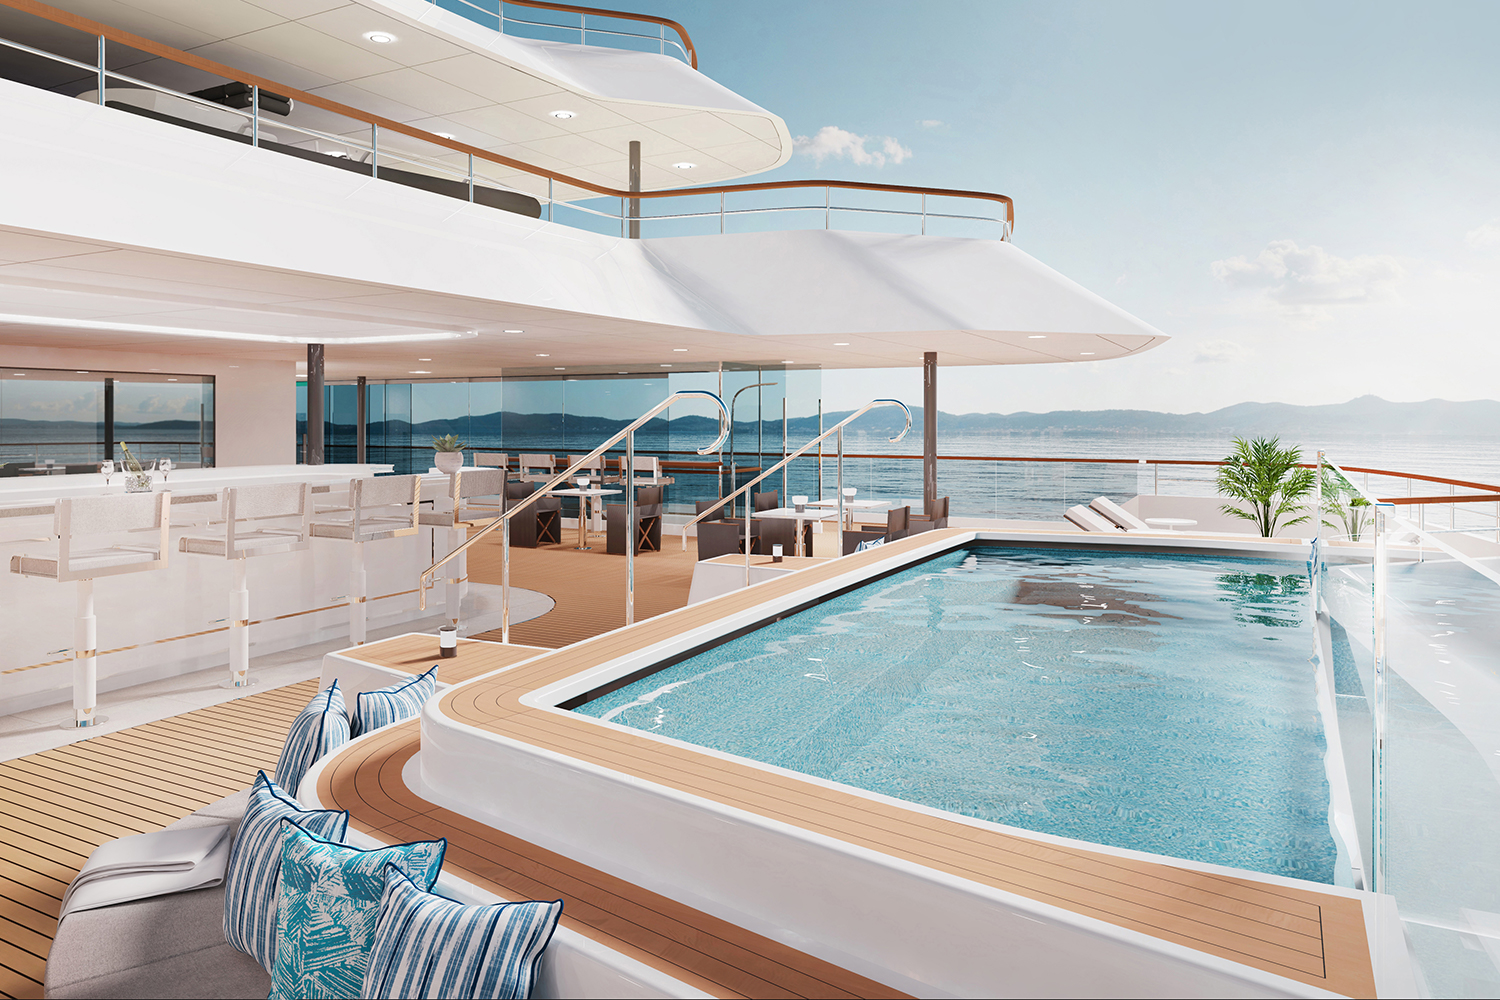 A rendering of a pool on the Evrima vessel from The Ritz-Carlton Yacht Collection